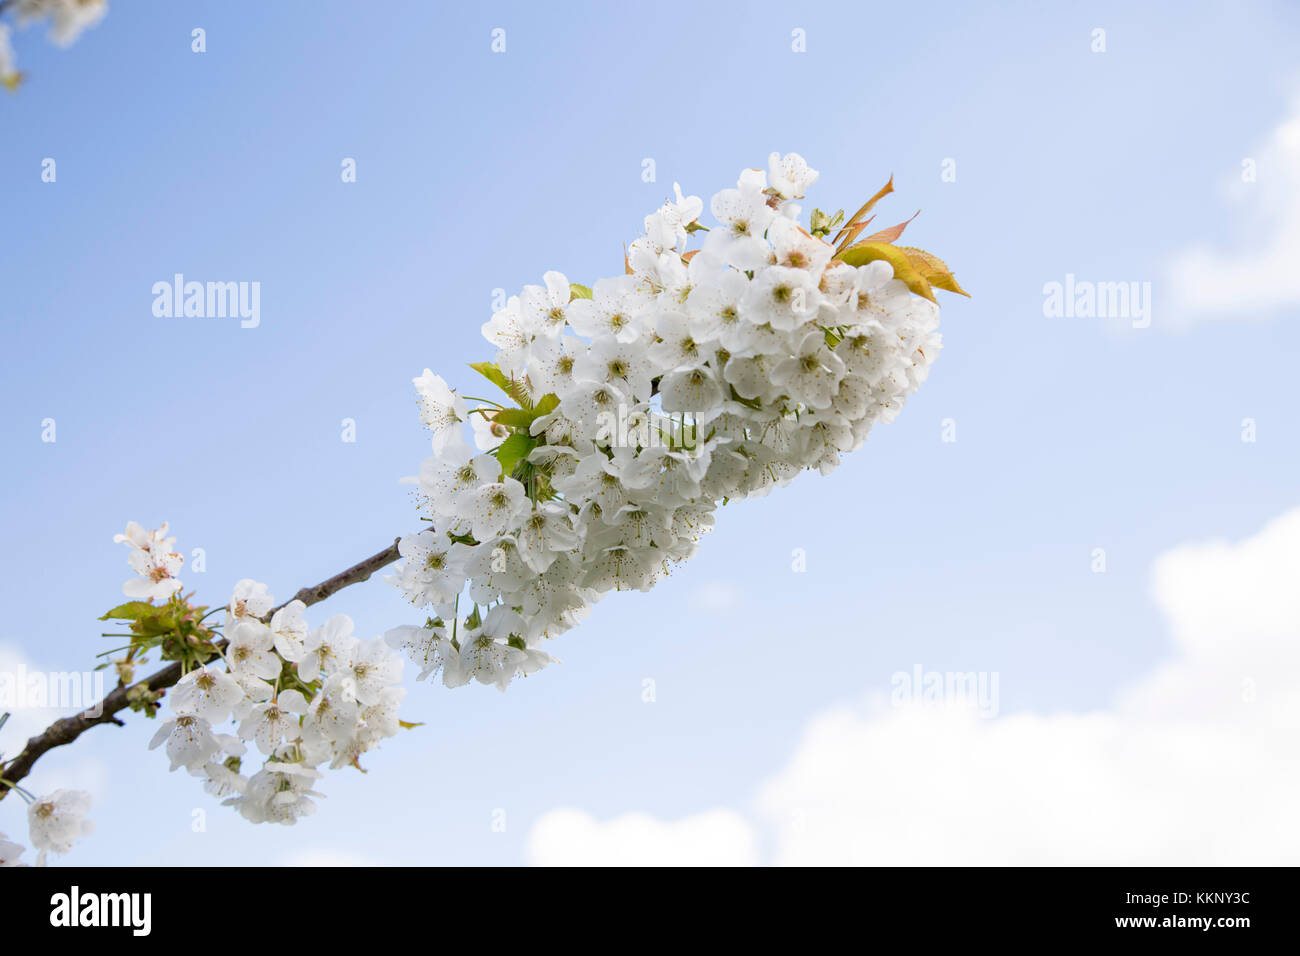 White cherry blossom on a cherry tree in an english garden against a blue sky at spring time Stock Photo